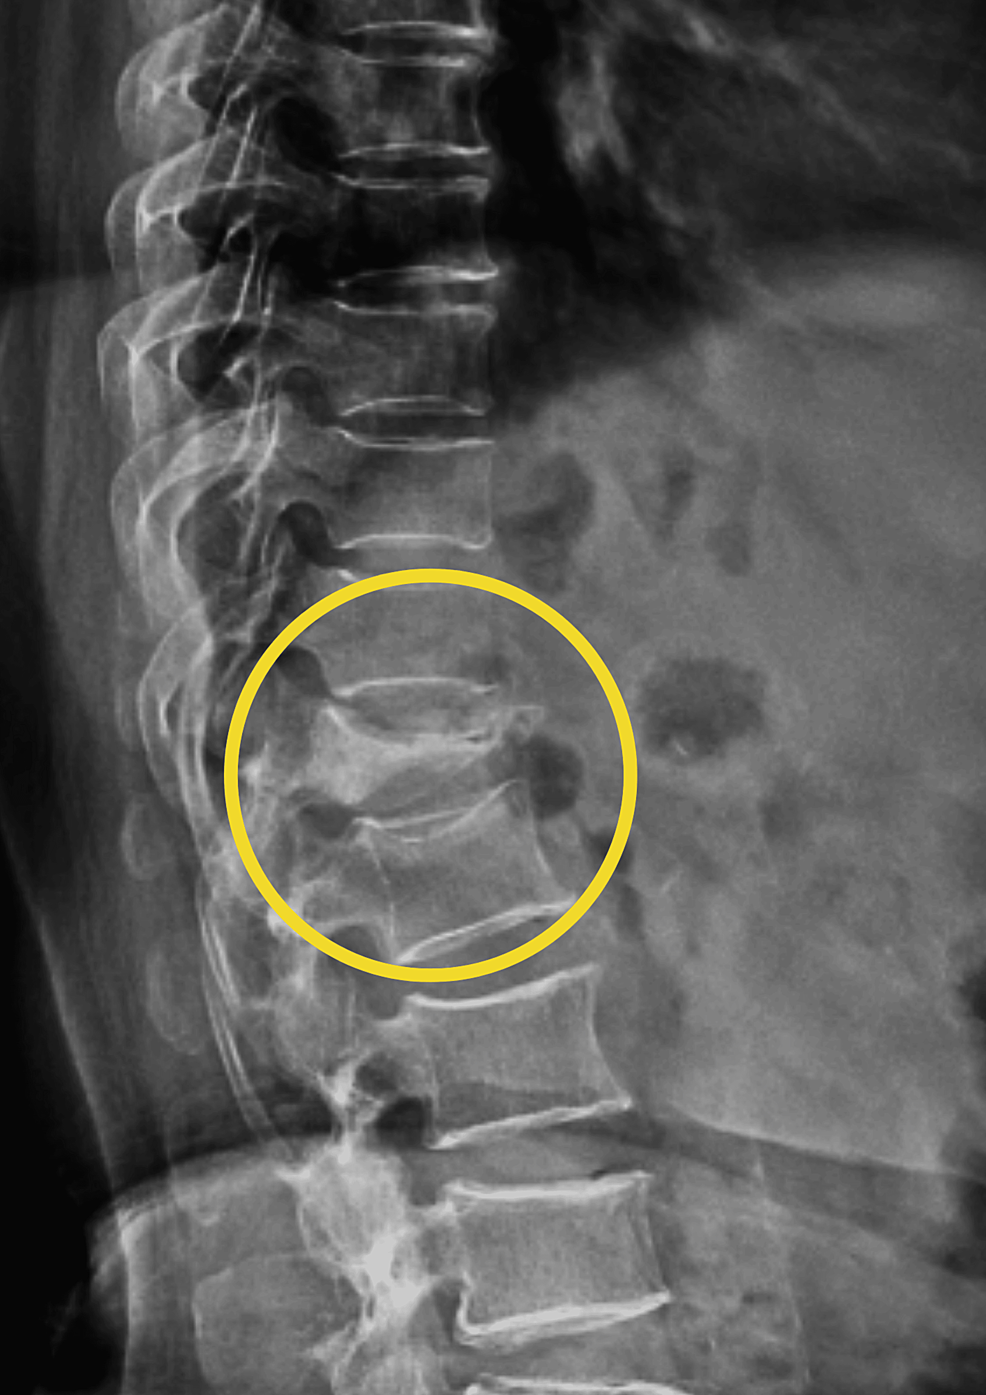 A lumbar compression fracture at L4 treated with a vertebral body